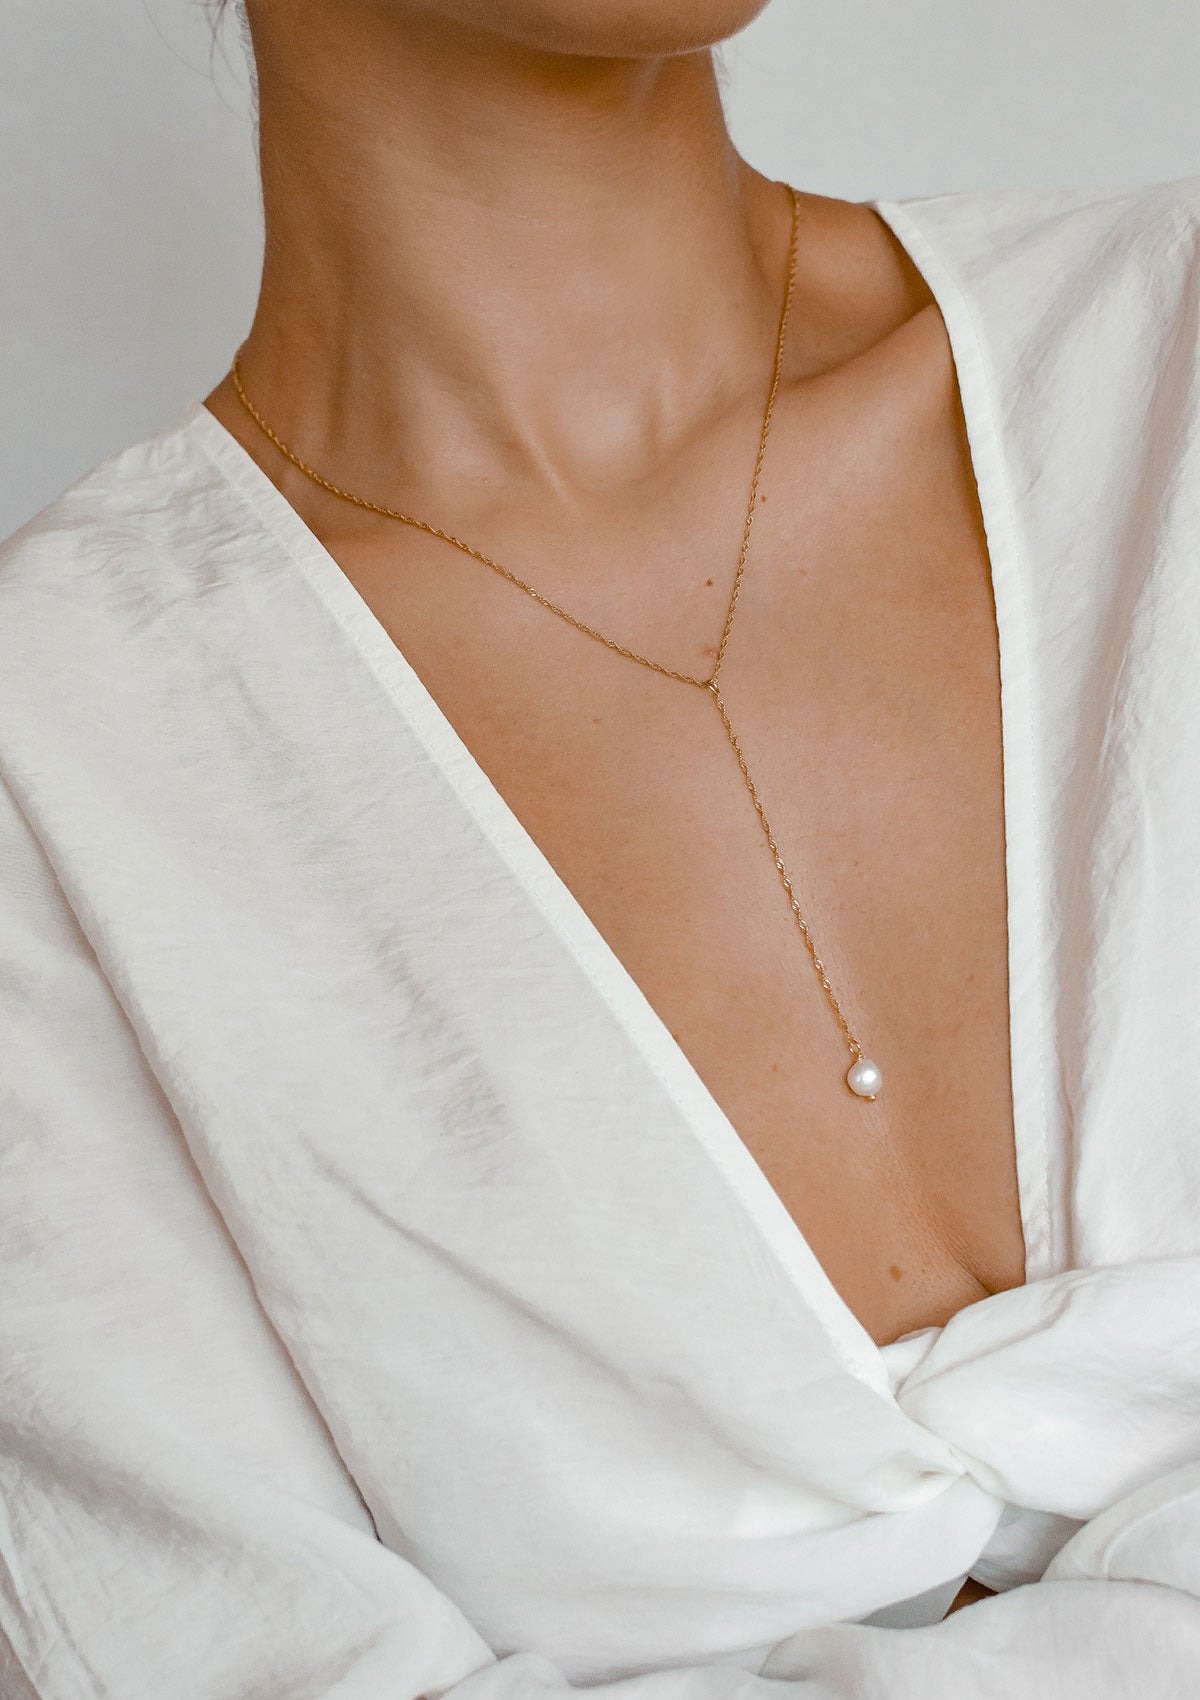 Pearl Chain Necklace Sterling Silver Gold – Hey Happiness